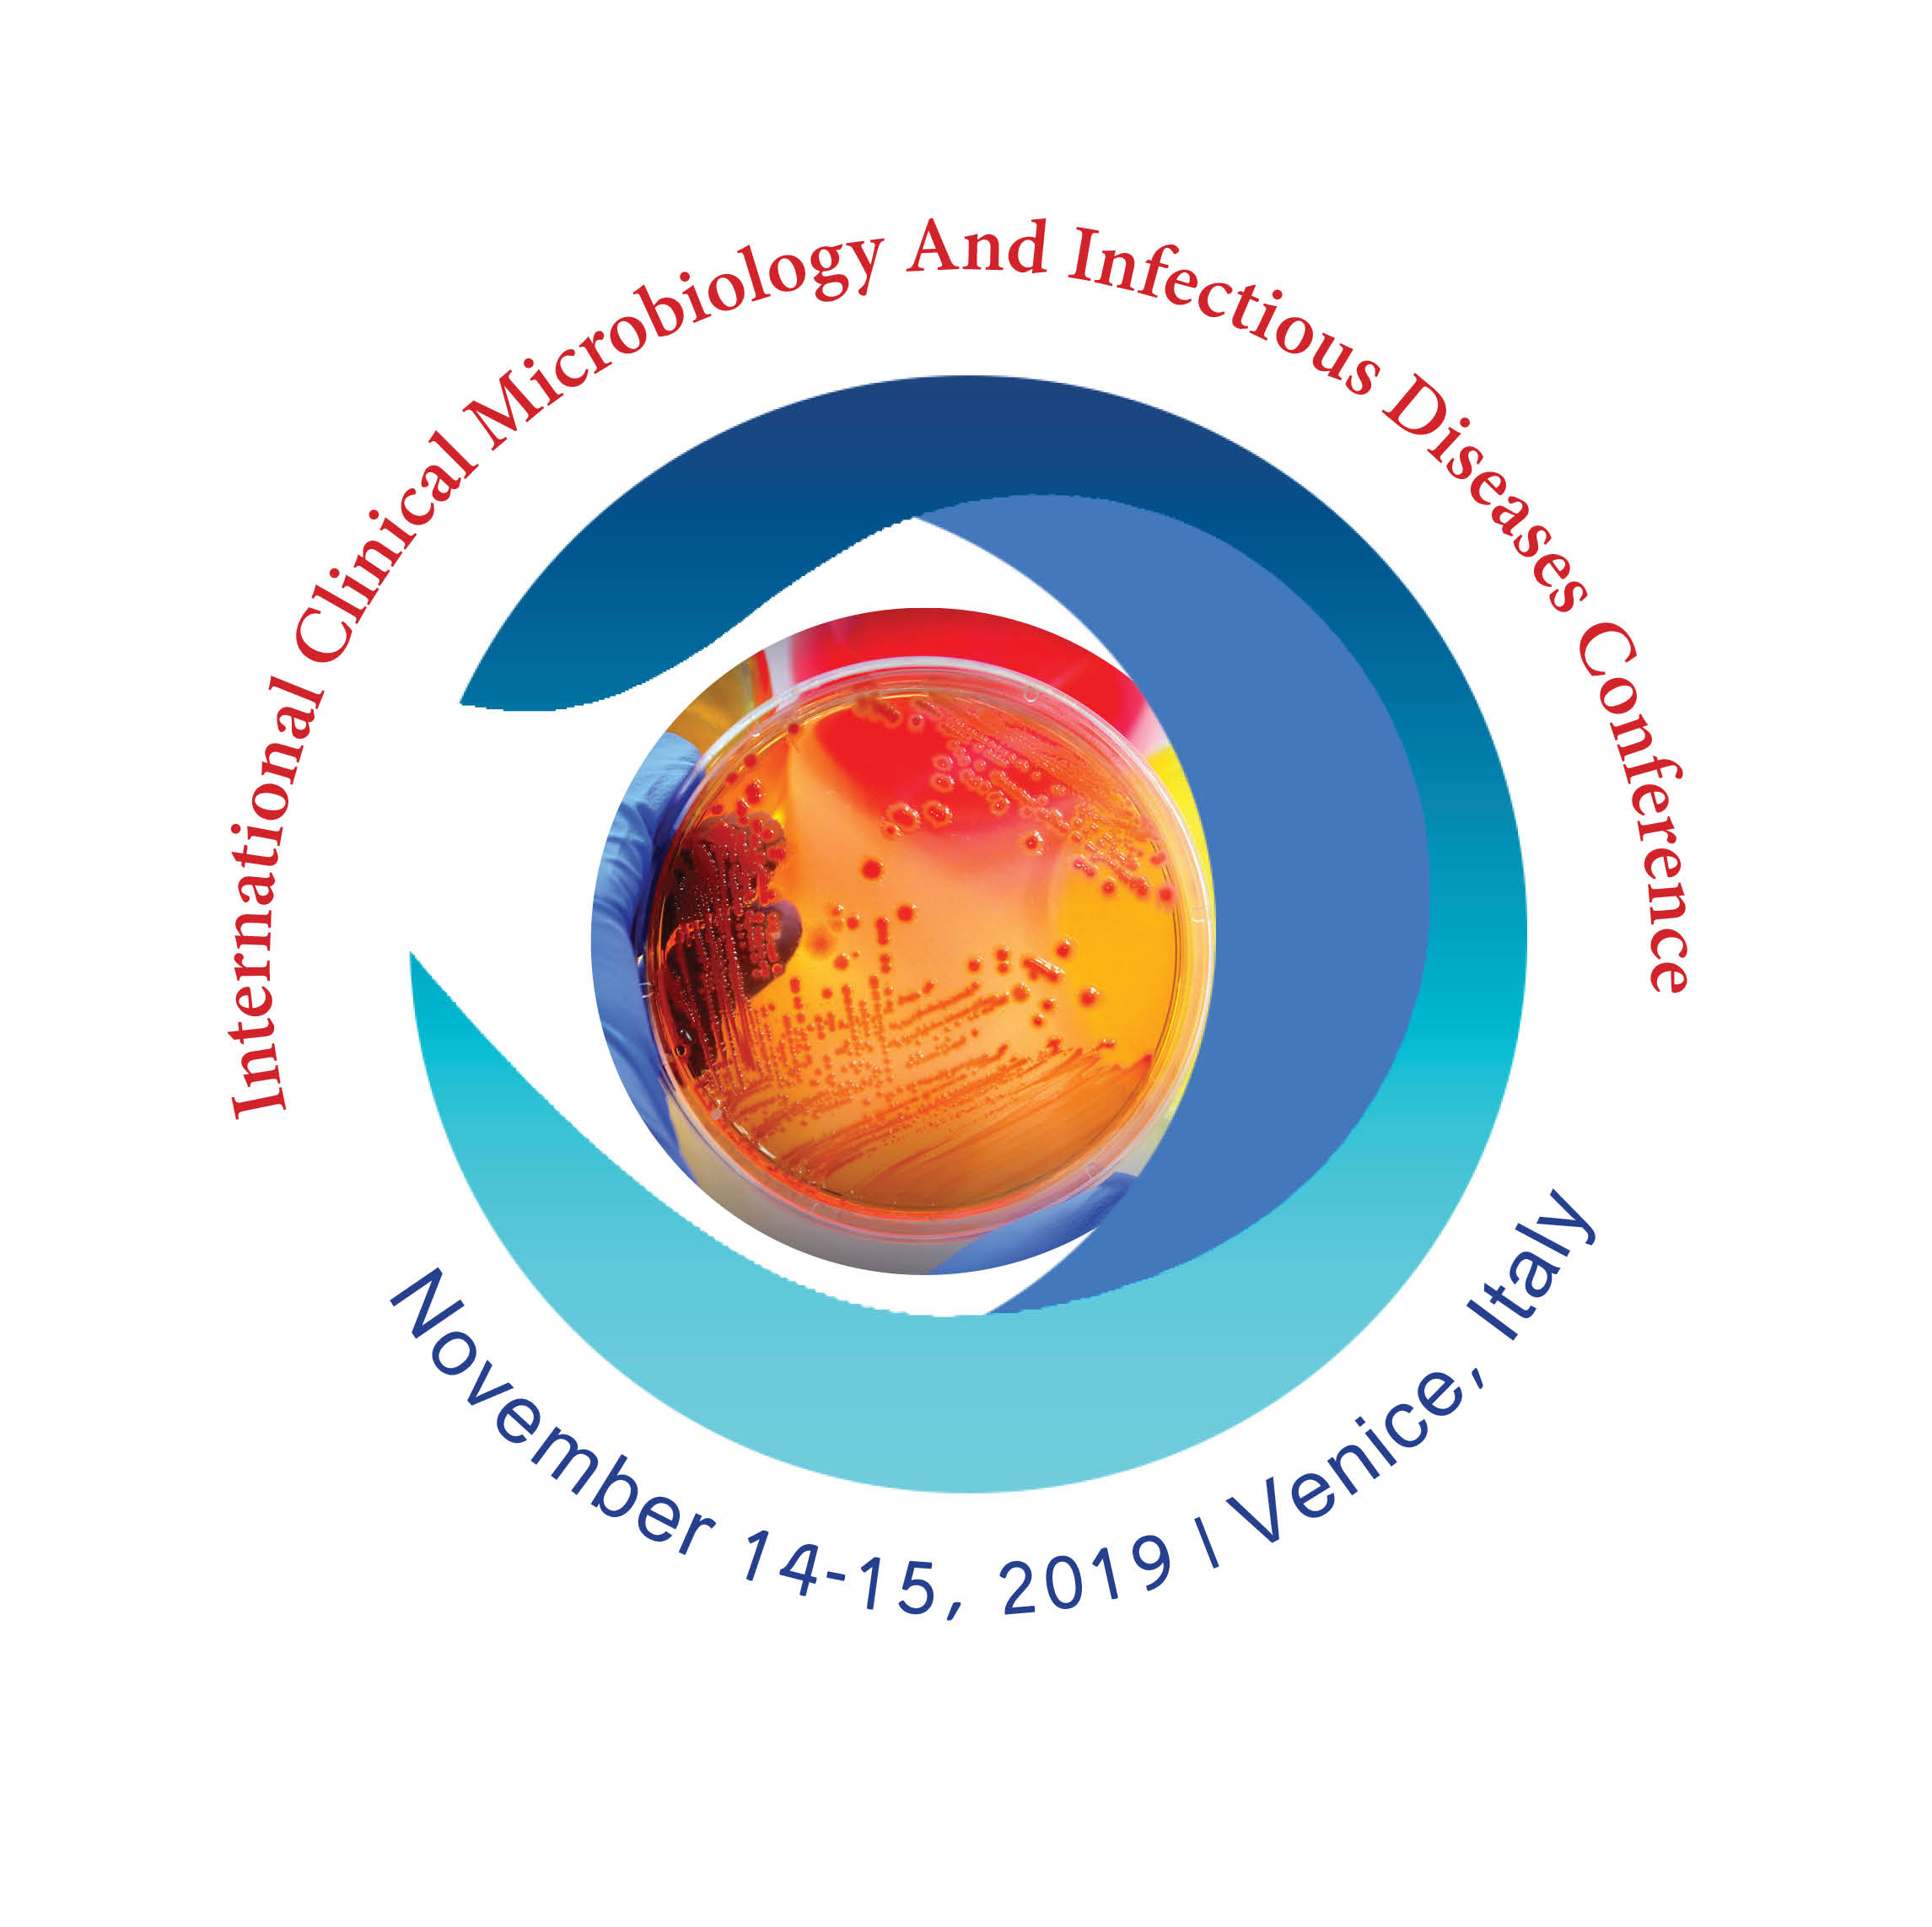 International Clinical Microbiology & Infectious Diseases Conferences-2019 